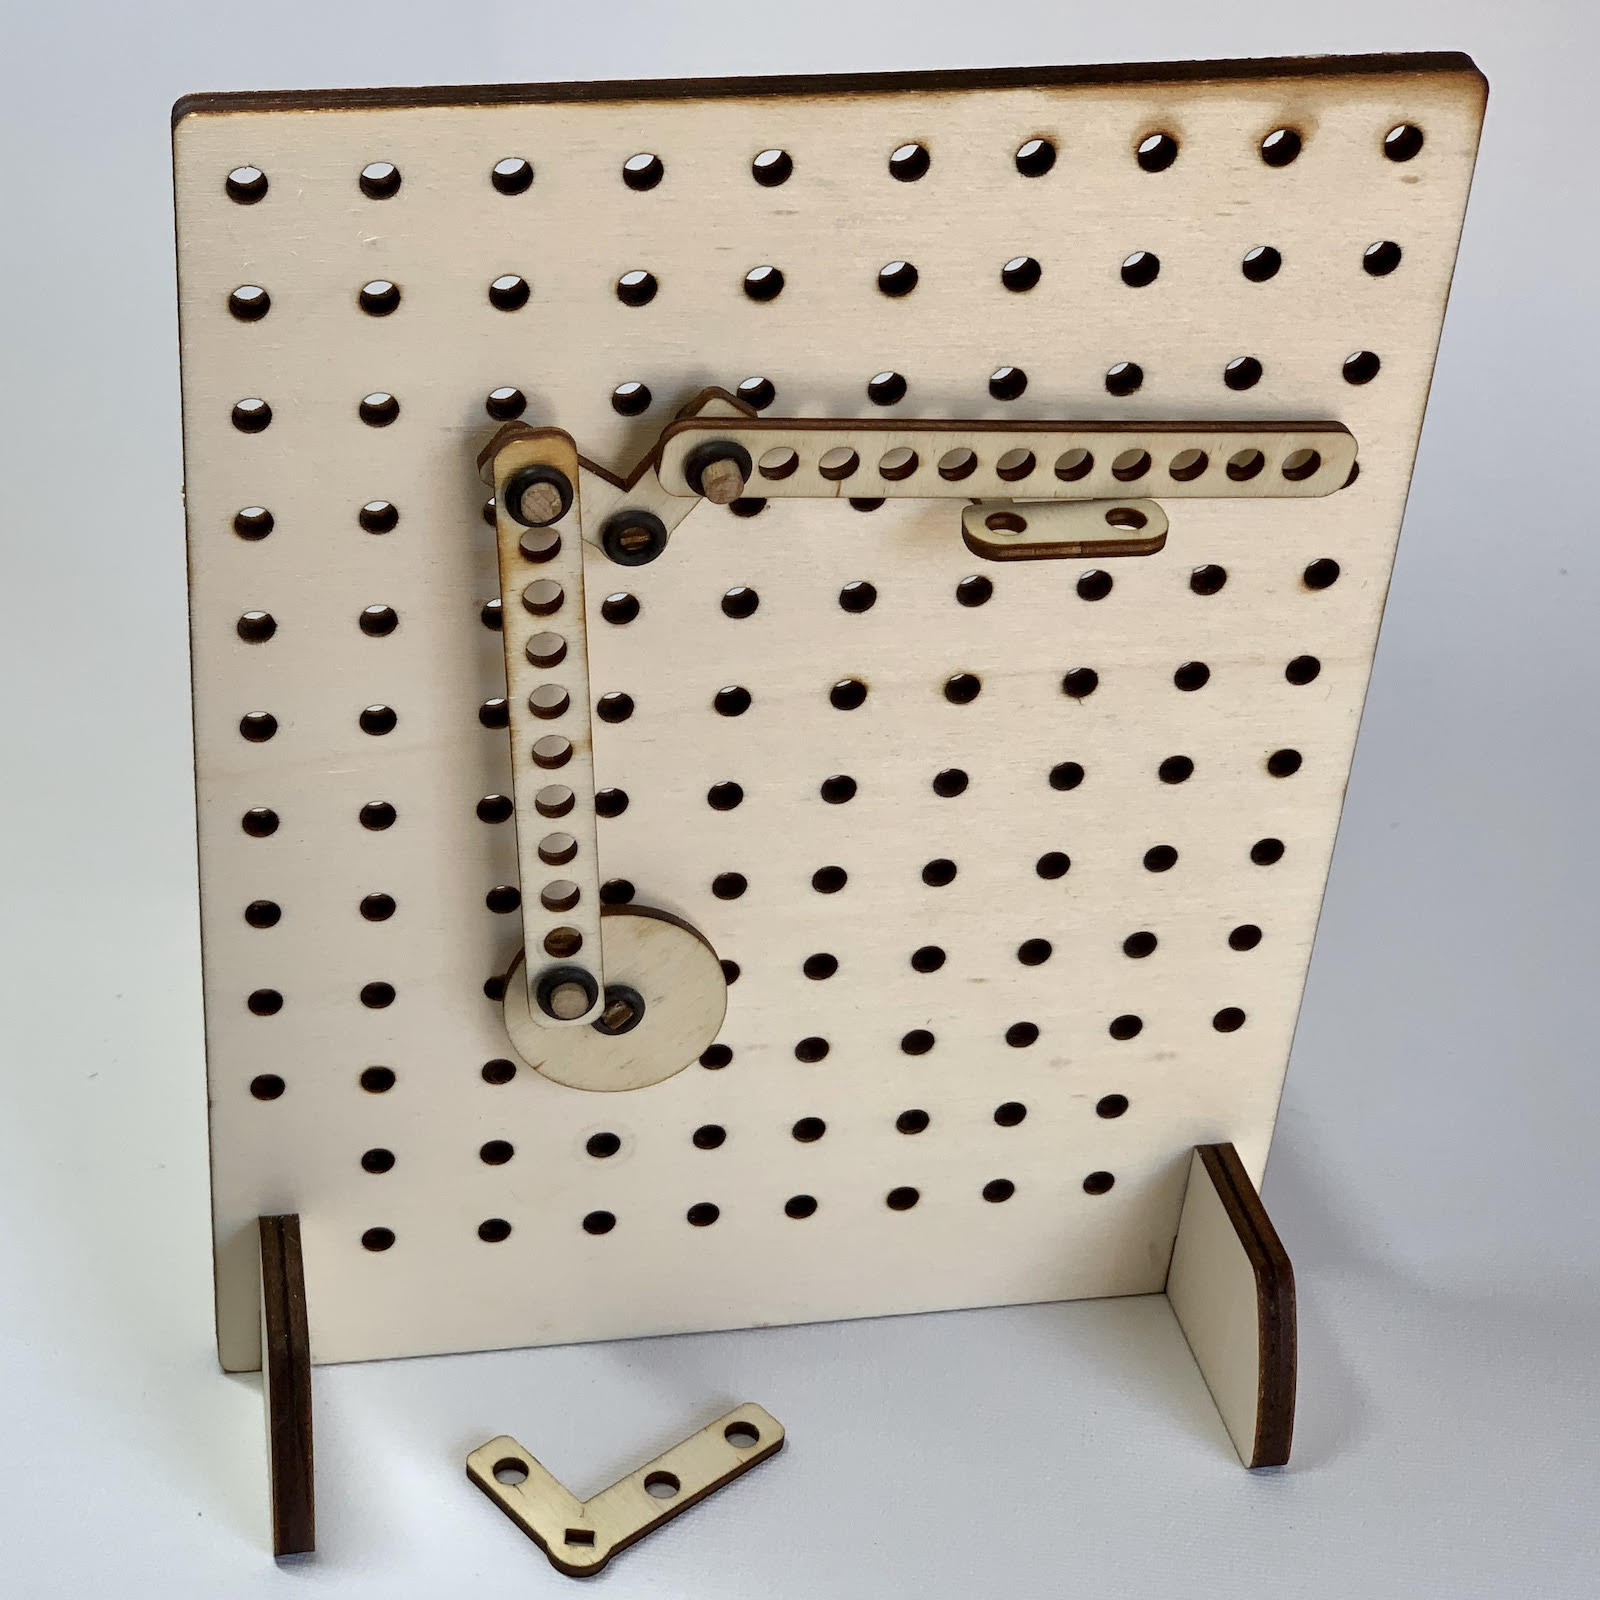 wooden pegboard with cam and linkages